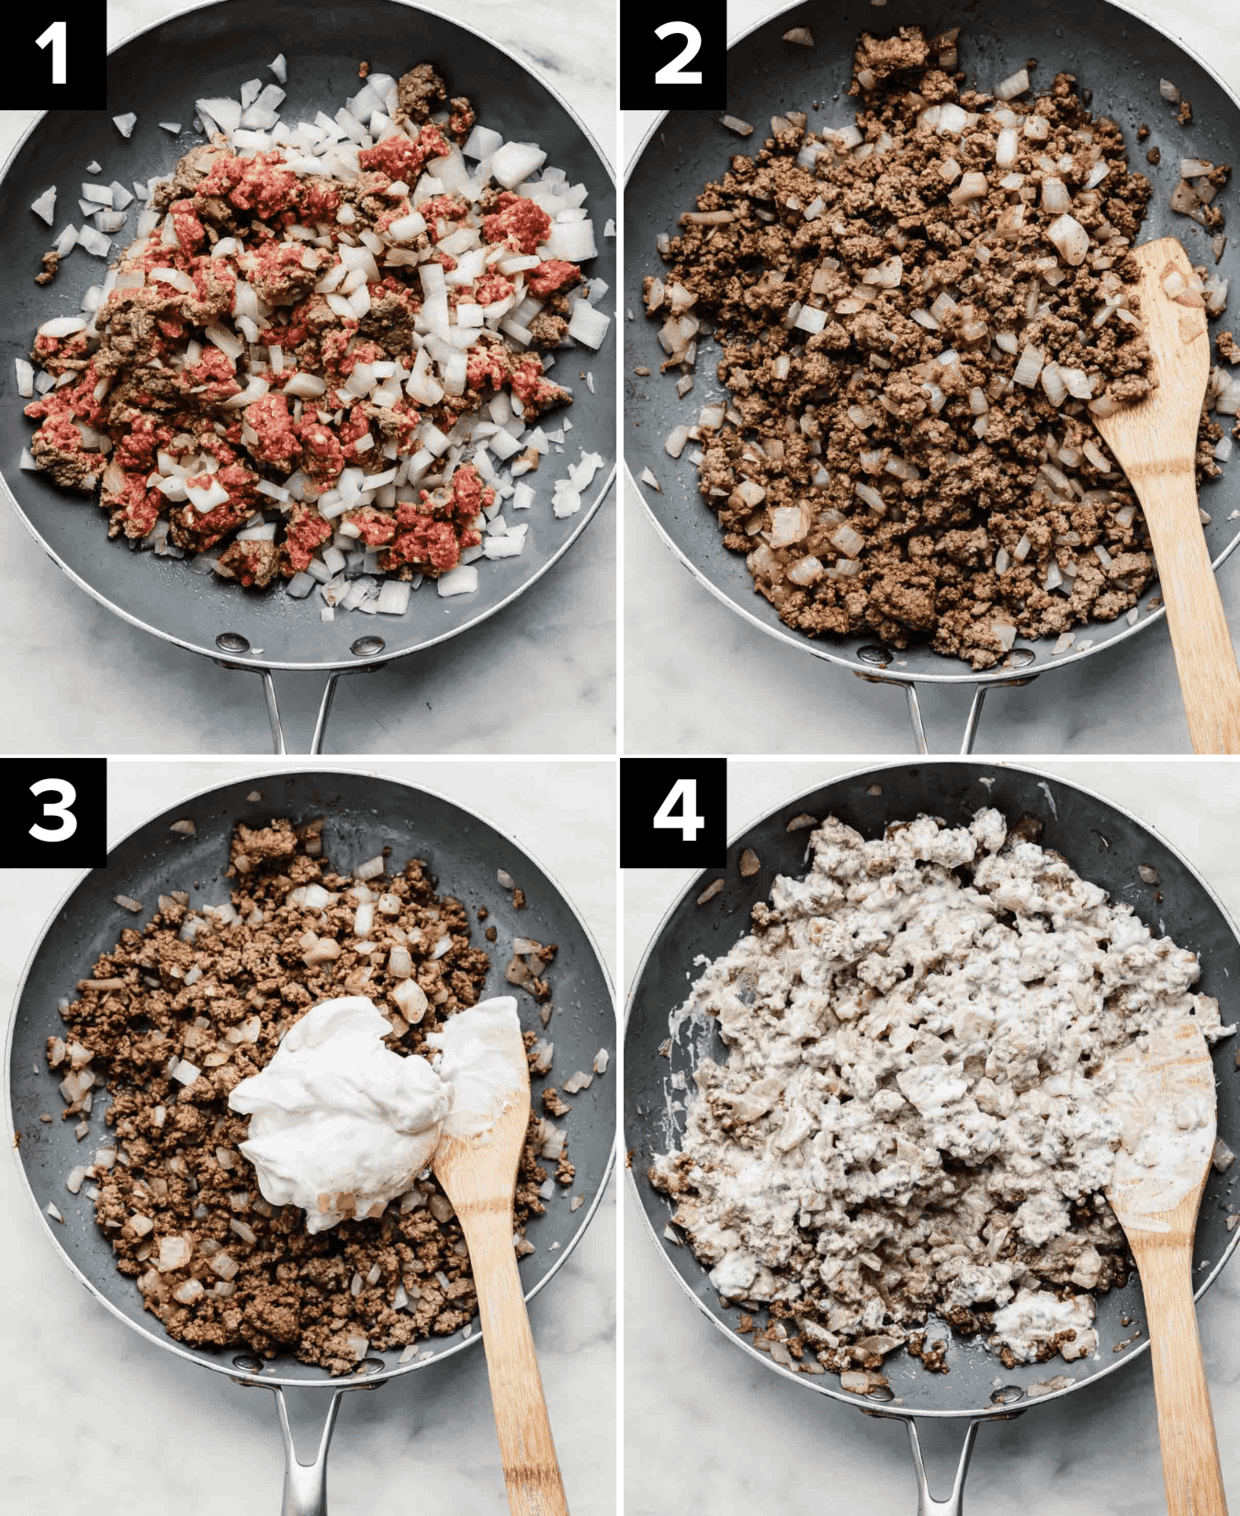 Four images showing a skillet with raw ground beef and diced onions, then cooking the meat, and adding sour cream and mixing it together.